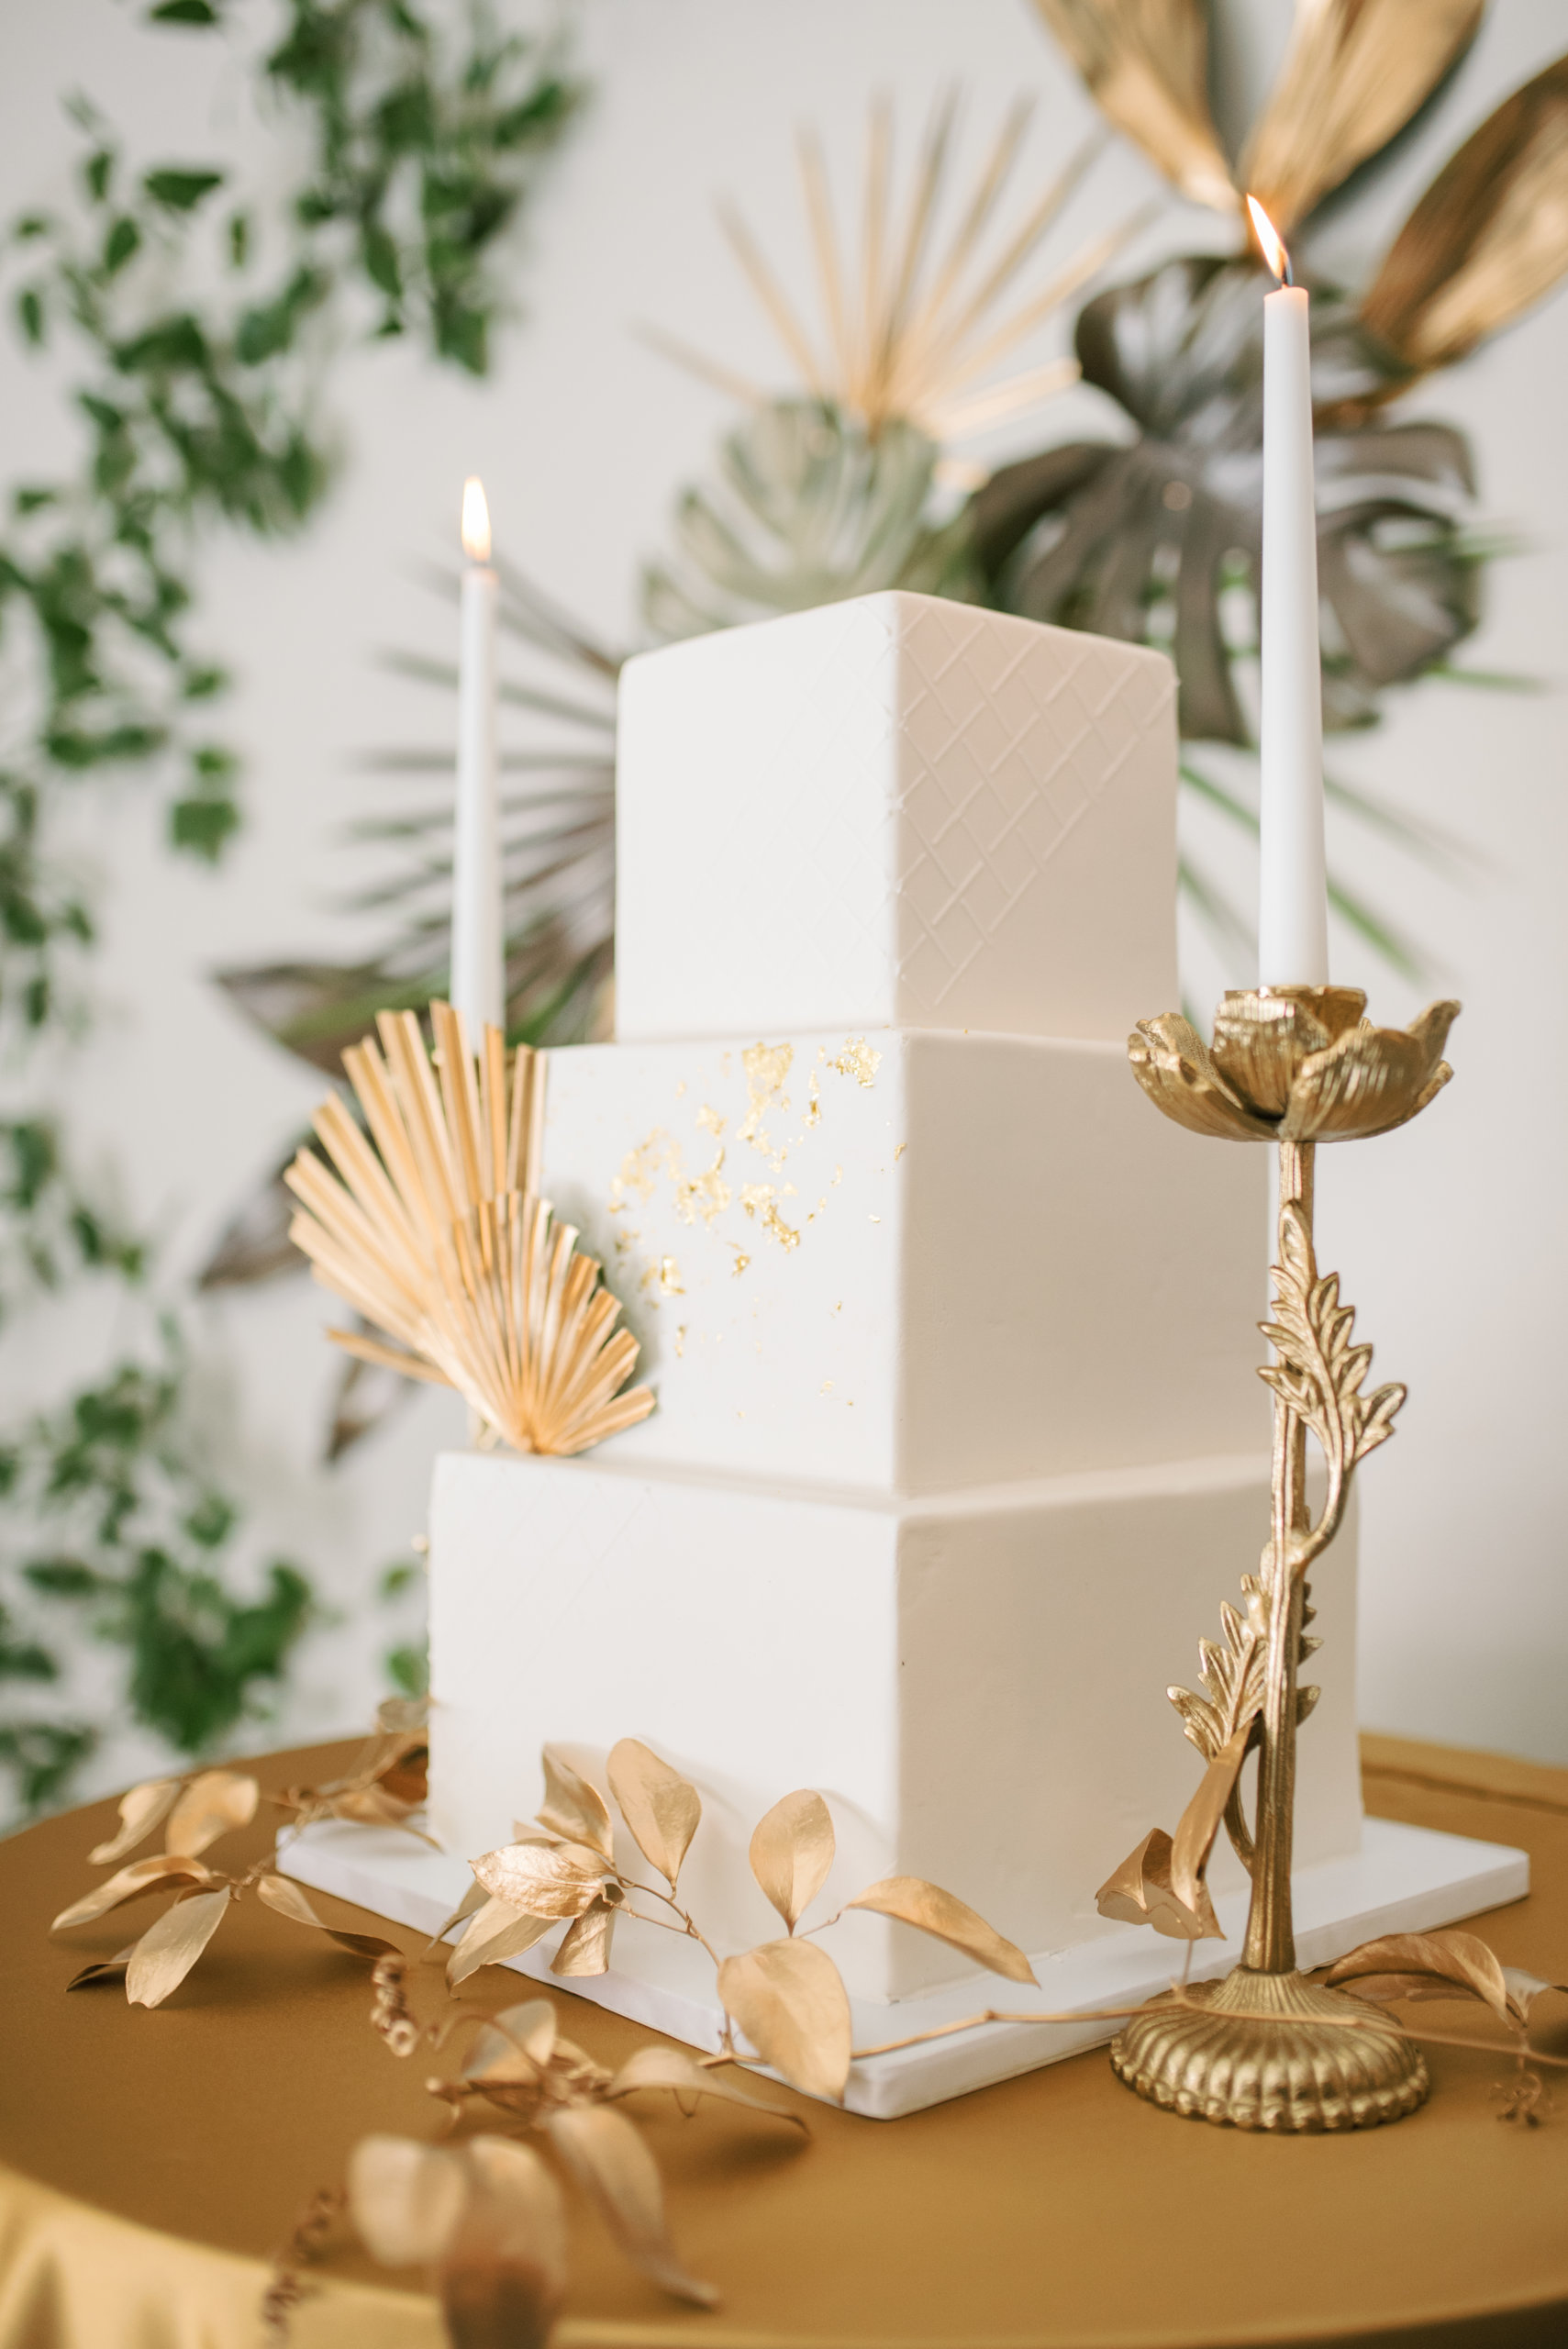 Wedding cake with gold details and candles